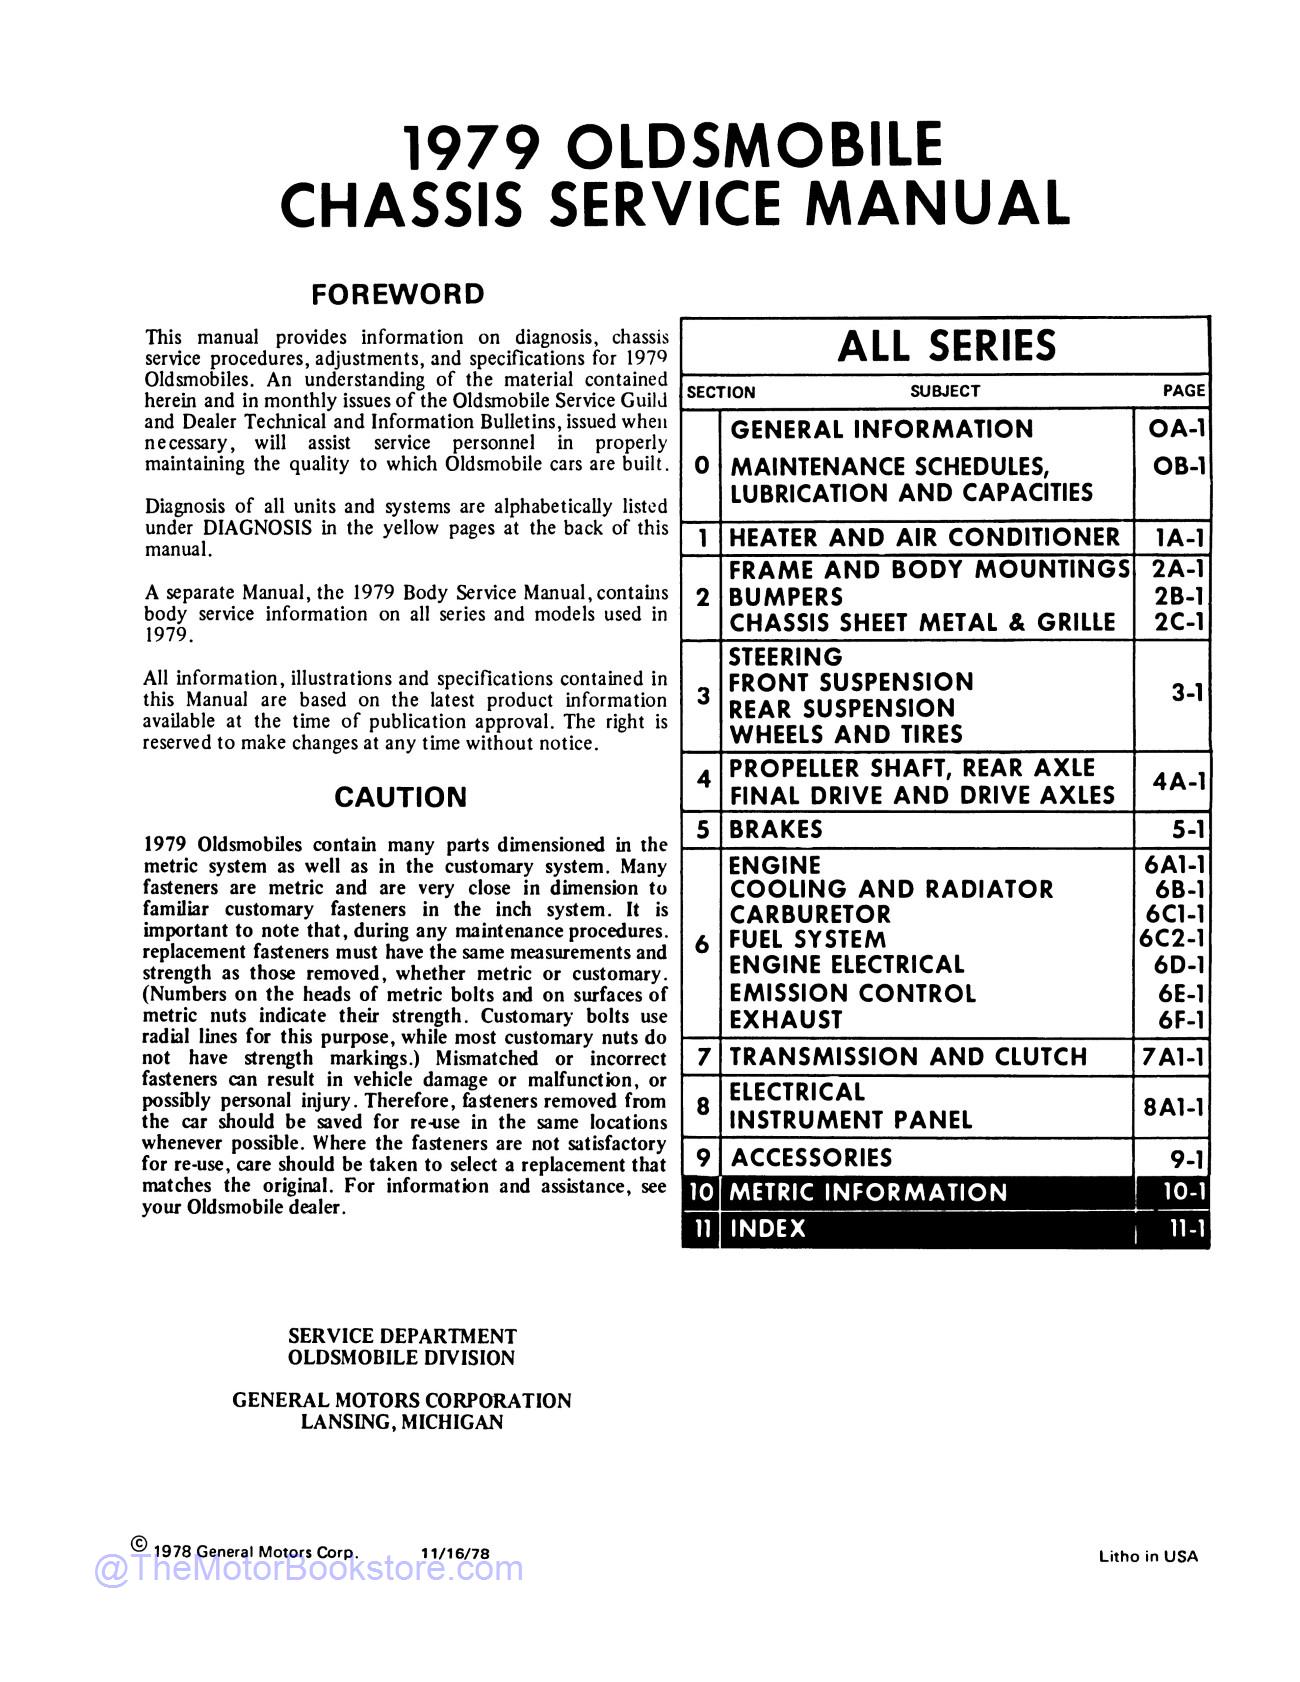 1979 Oldsmobile Service Repair Manual  - Table of Contents